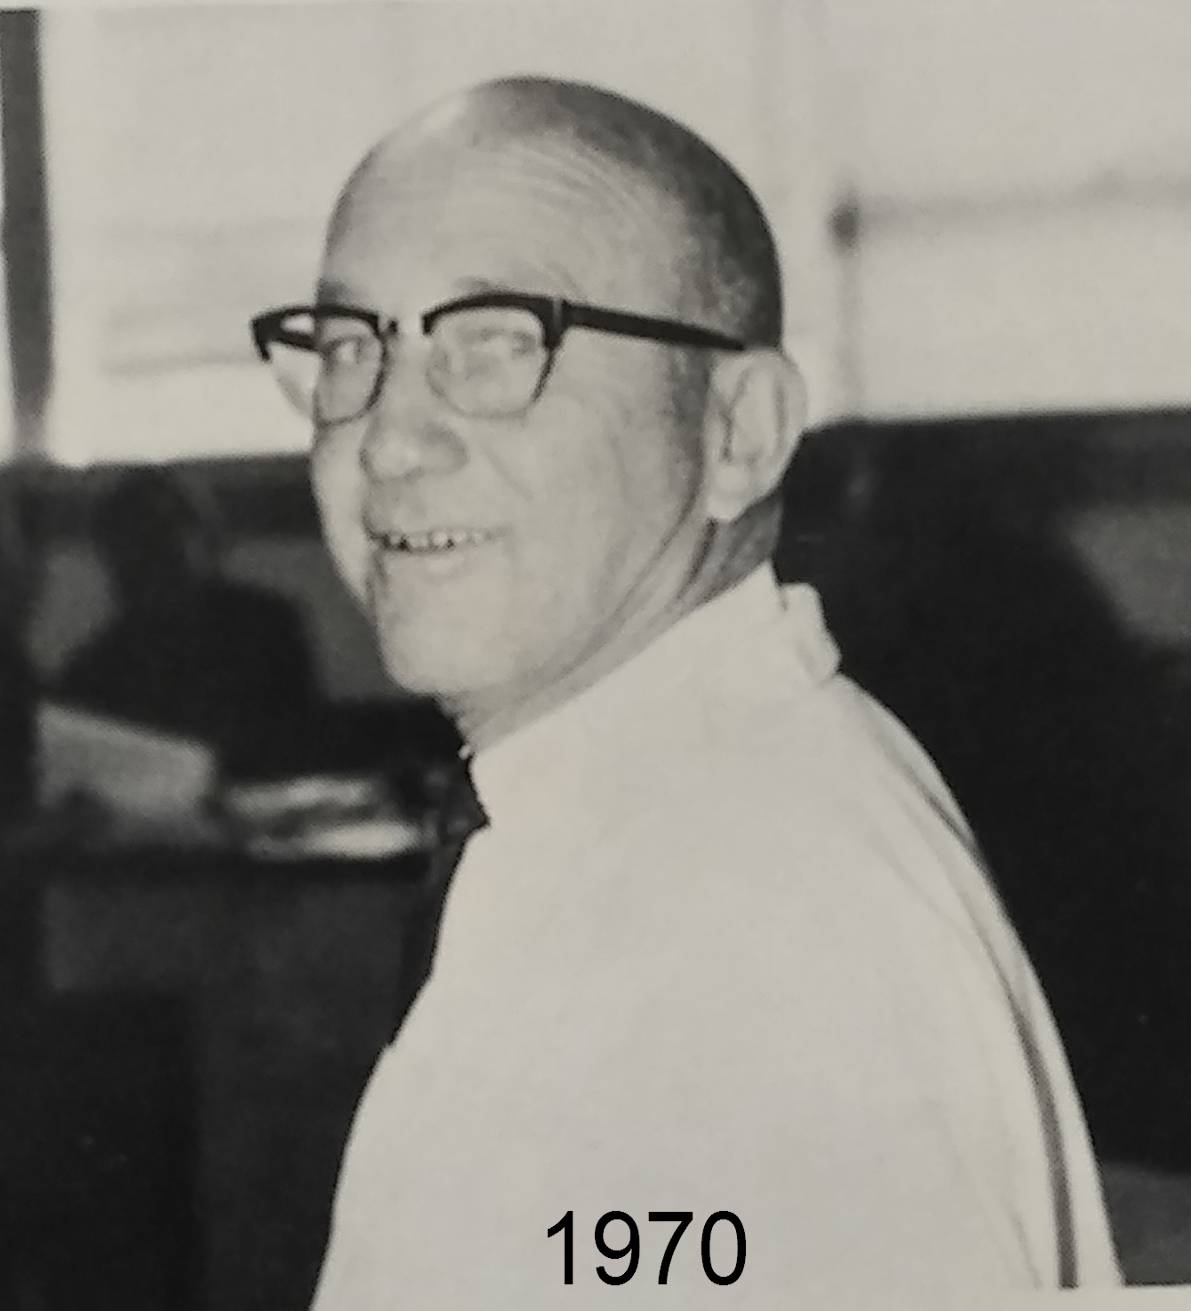 Picture of Alvin Parker from 1970